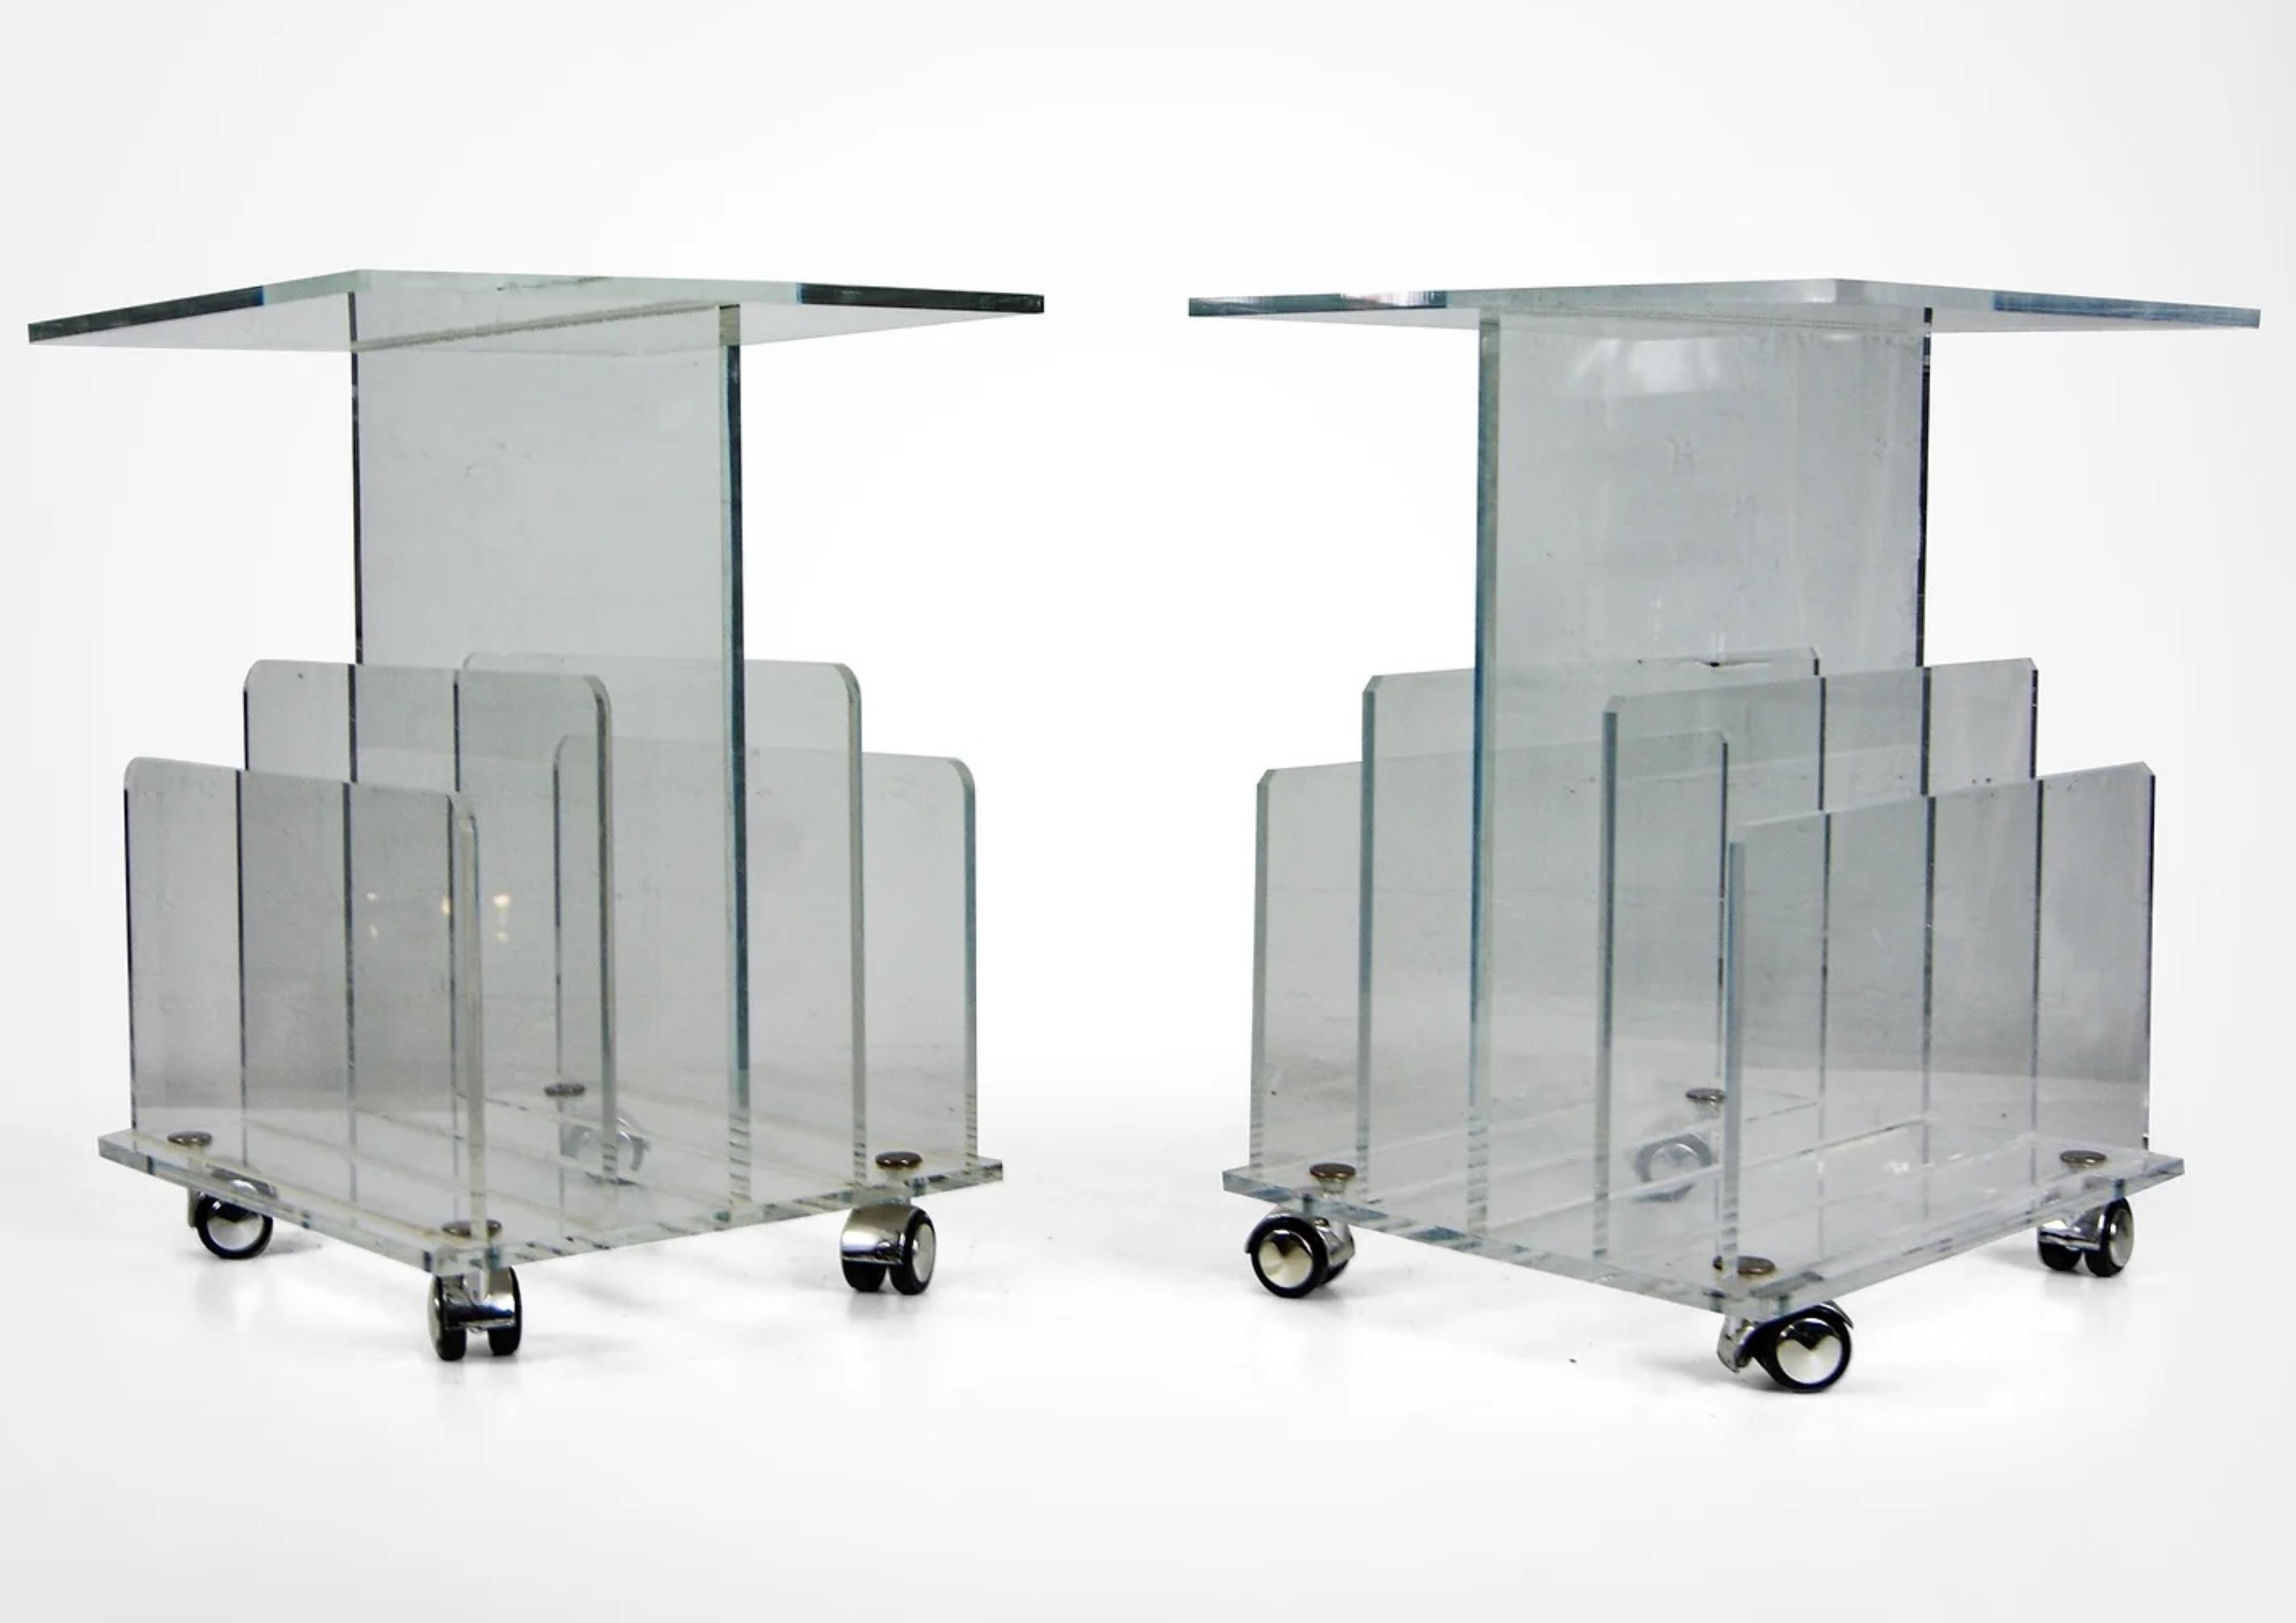 Pair of clear acrylic lucite side tables with magazine racks to the sides..circa late 1980s-France
Lovely multi-purpose decor, ideal for living large in small spaces.
The tables stand on chrome castor wheels.

In very good vintage condition and